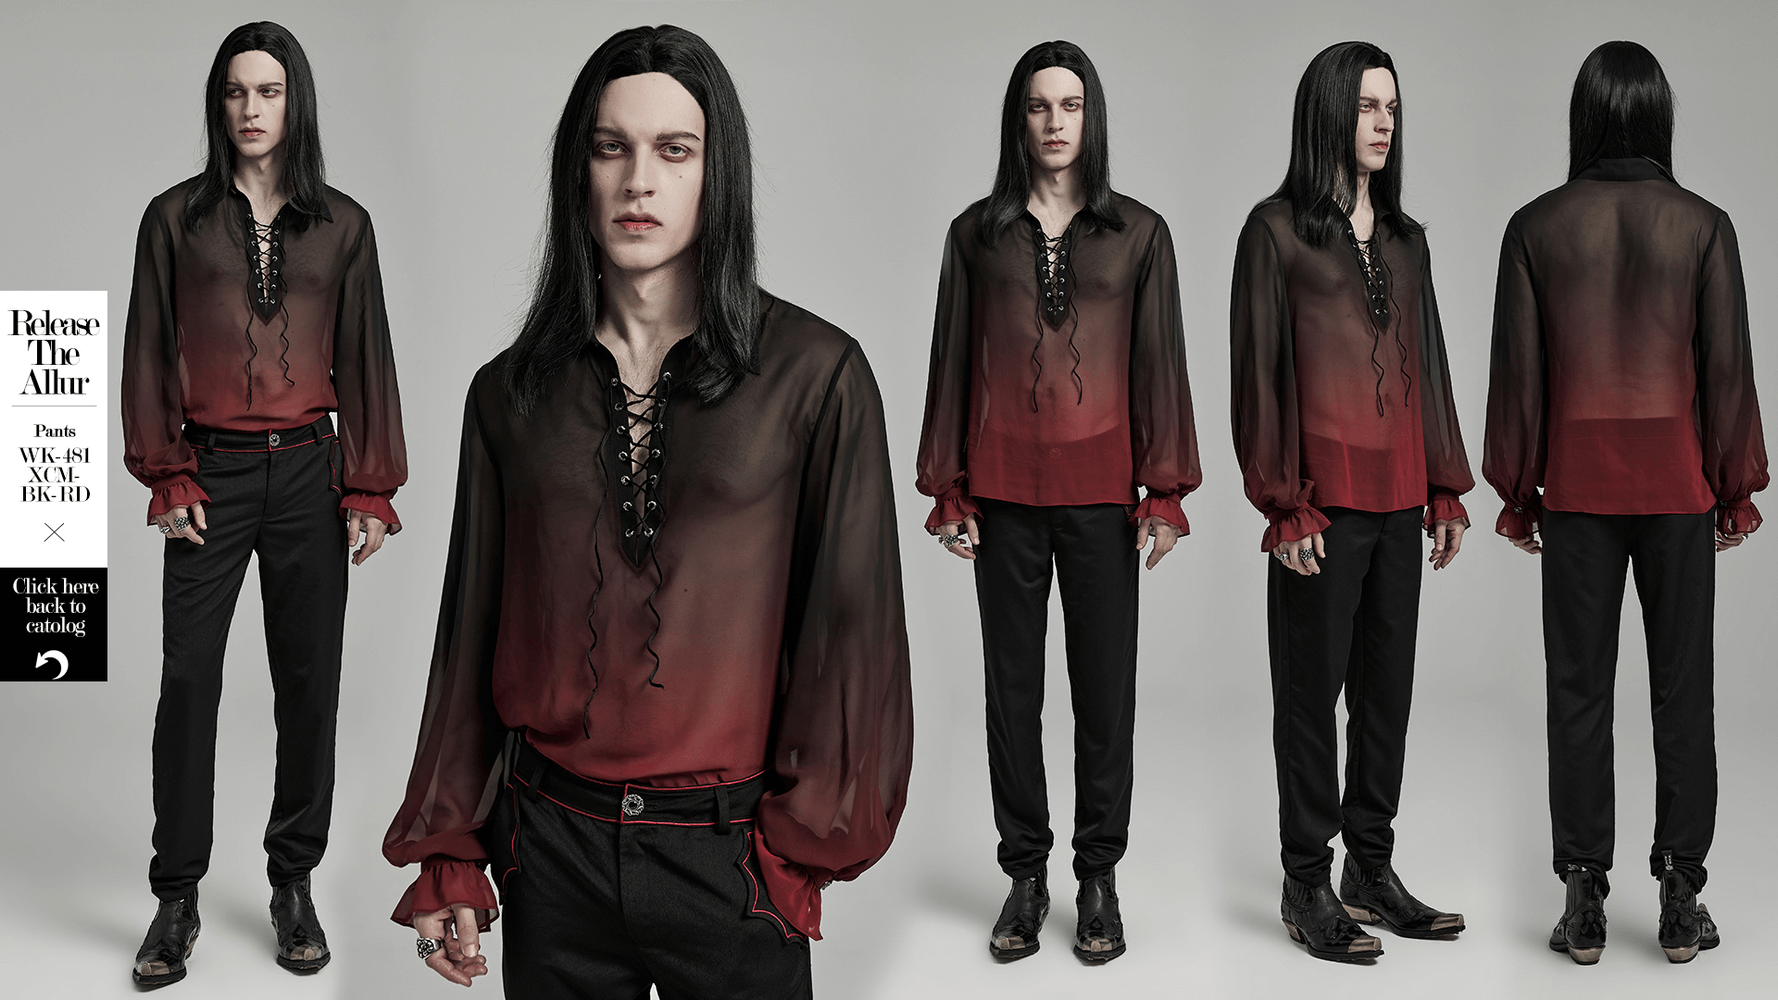 Sheer Chiffon Lace Up Front Gothic Shirt for Men